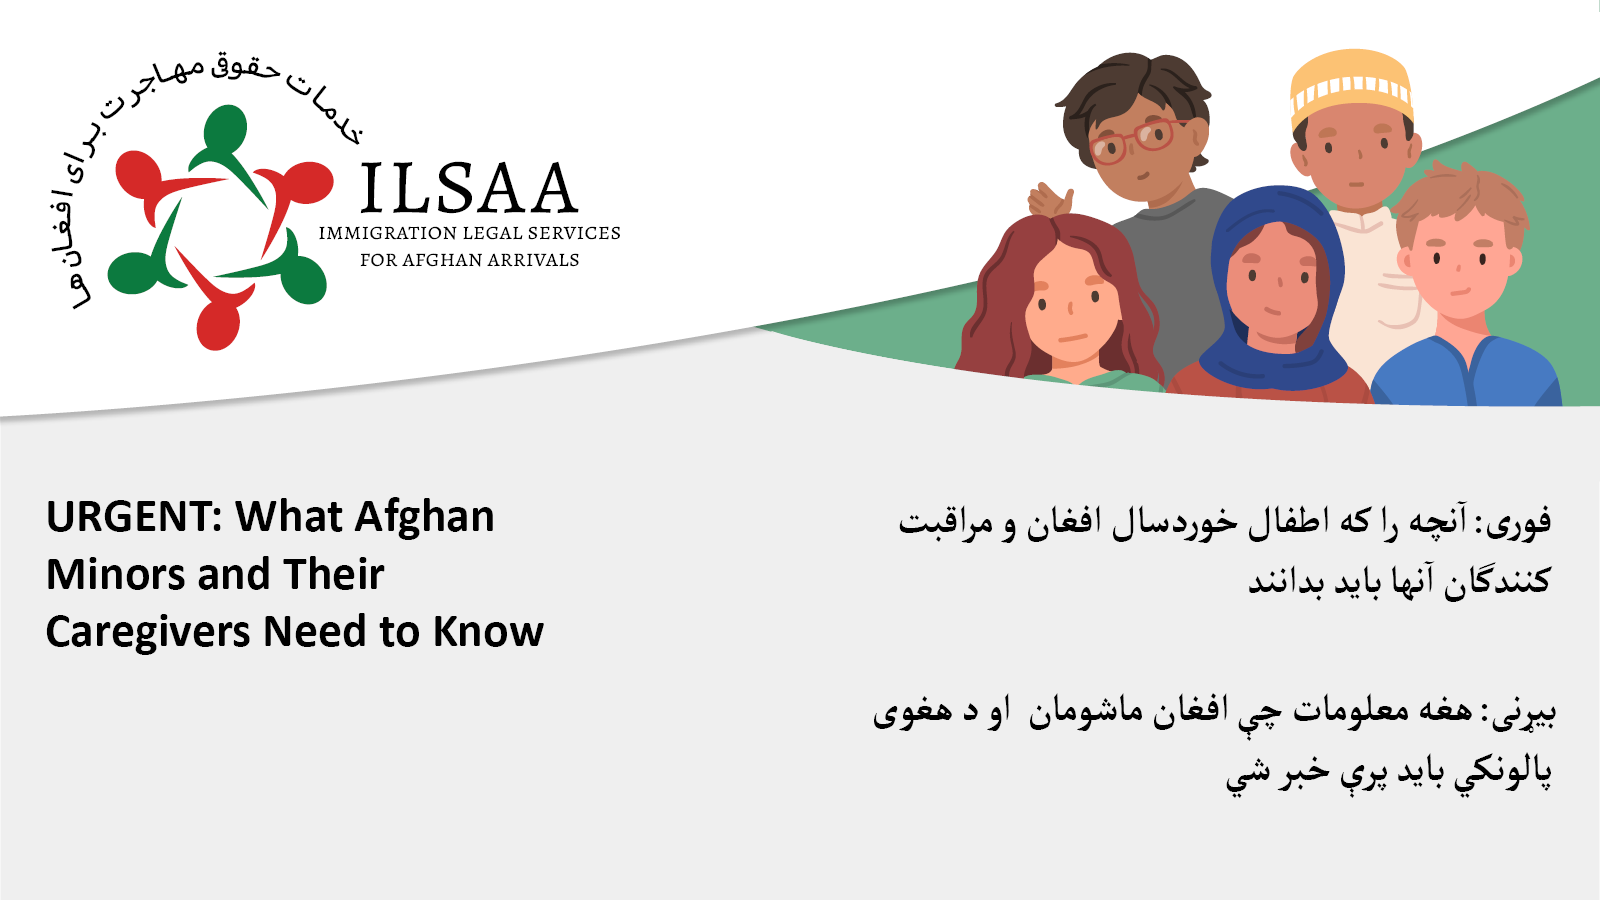 URGENT: What Afghan Minors and Their Caregivers Need to Know